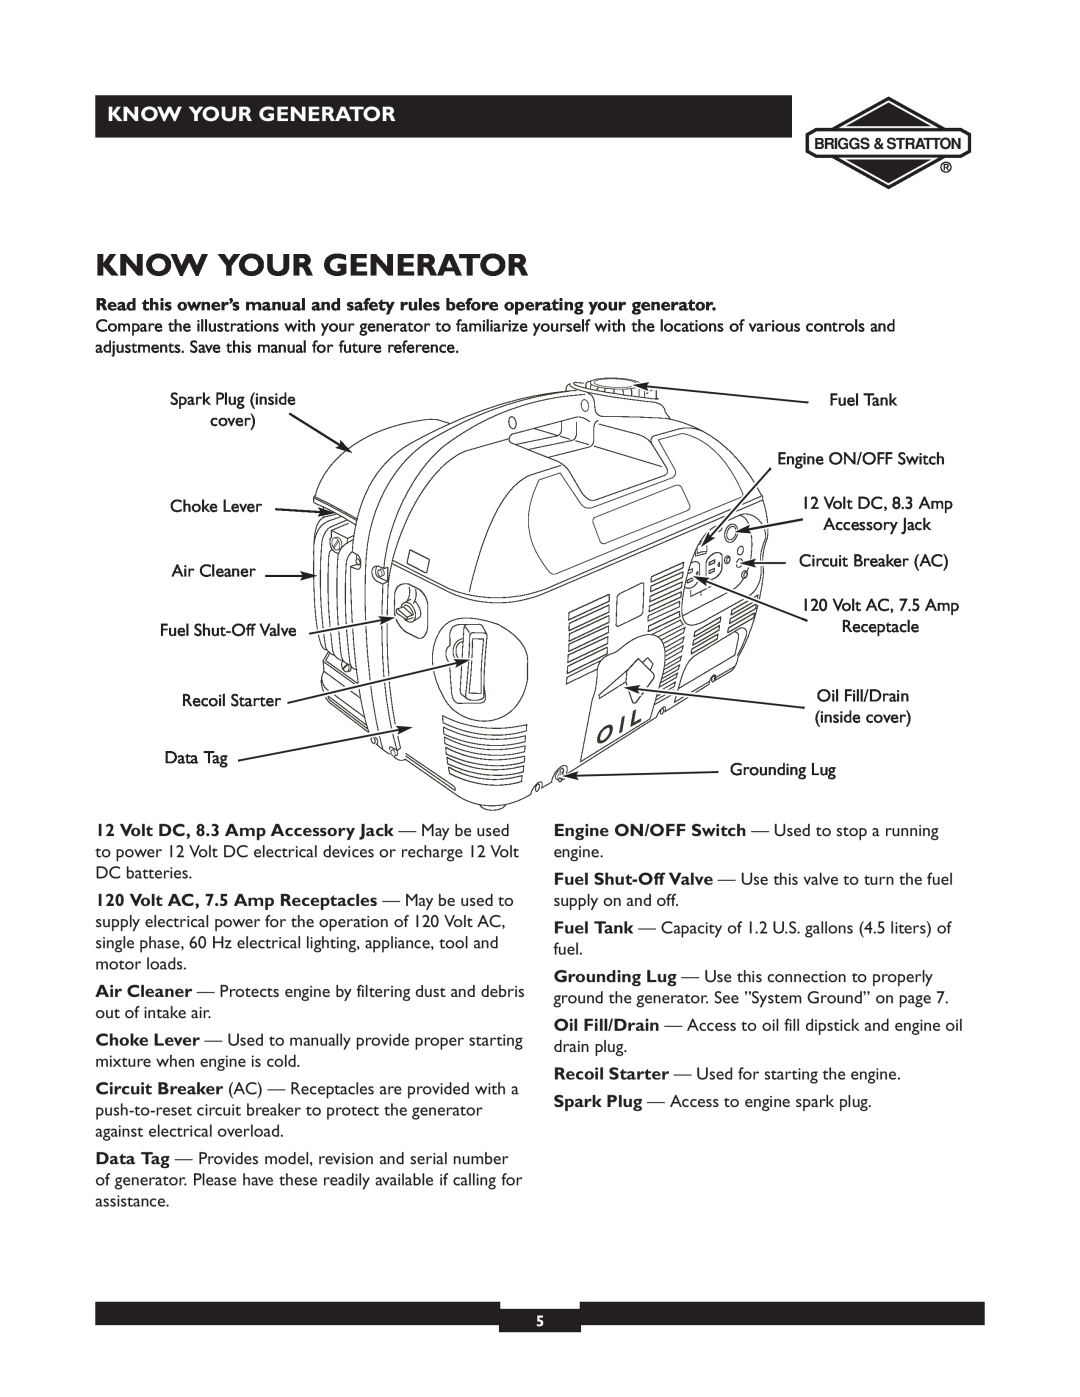 Briggs & Stratton 01532-4 owner manual Know Your Generator, Engine ON/OFF Switch - Used to stop a running engine 